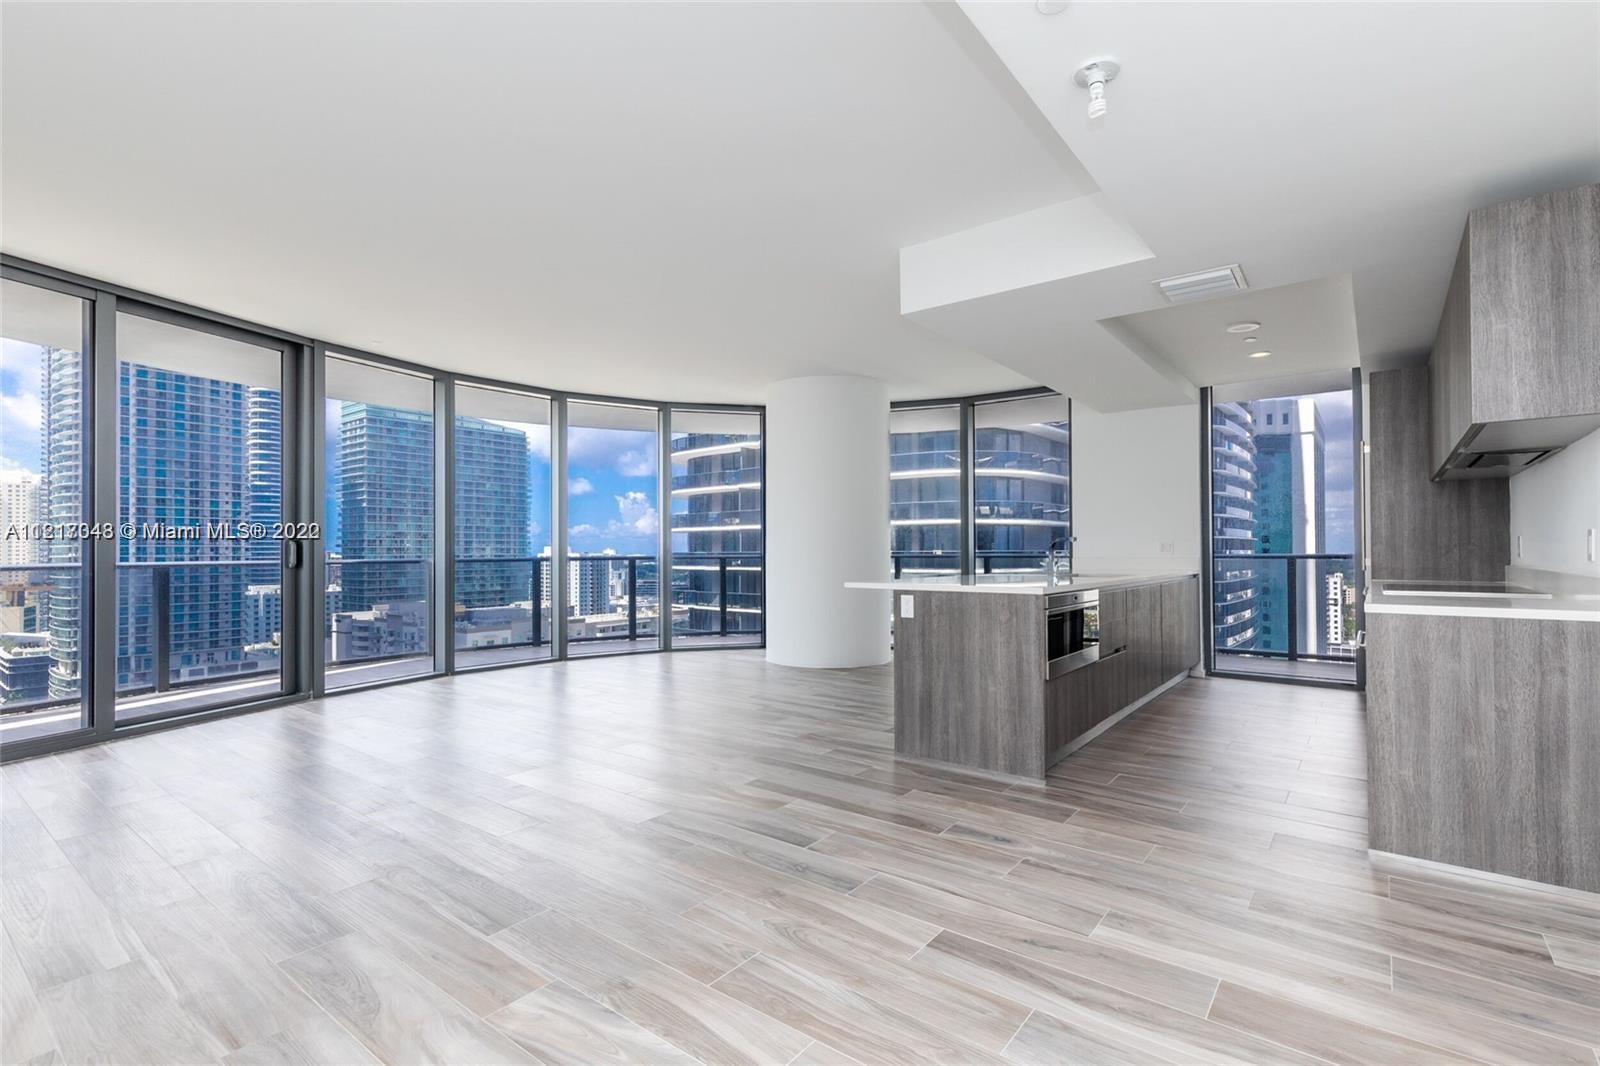 LUXURY 3 bed/4 baths SLS LUX Unit with PRIVATE Elevator & Floor -To- Ceiling Windows. Located in the Heart of Brickell with steps away from Brickell City Centre. Top of the class amenities: Tennis Courts, Two Pools, Sundeck, Spa/Sauna, Indoor Gym, Game Room, Putting Green, Rock Climbing, Outdoor Exercise Area, 24 Hour Concierge, Restaurants, Bars & Much More. Rentals minimum 31 days up to 3 times/year. Submit All Offers!